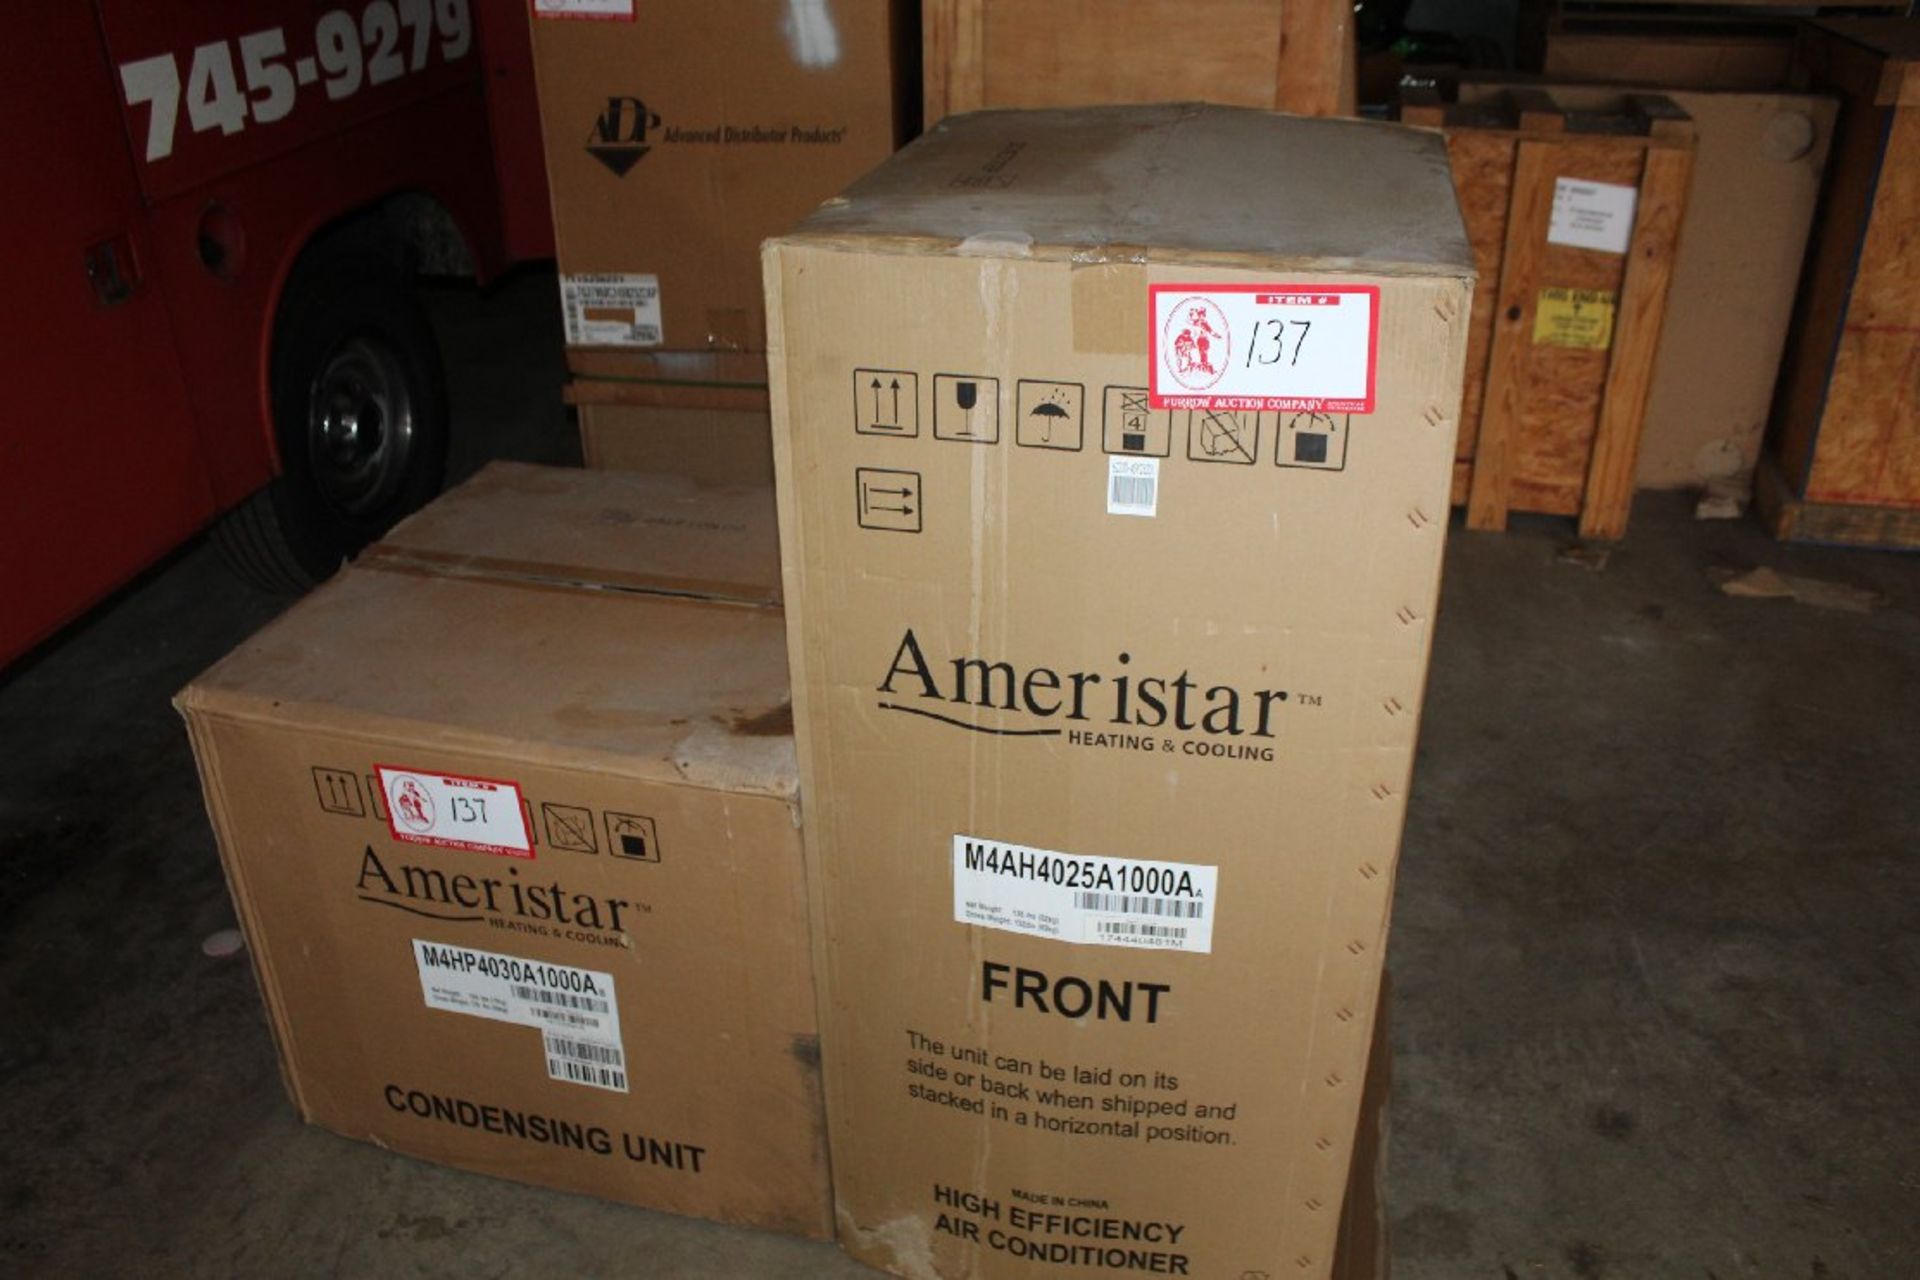 Ameristar High-Efficiency Air Conditioner Model M4AH4025A100A - TENNESSEE SALES TAX WILL APPLY.